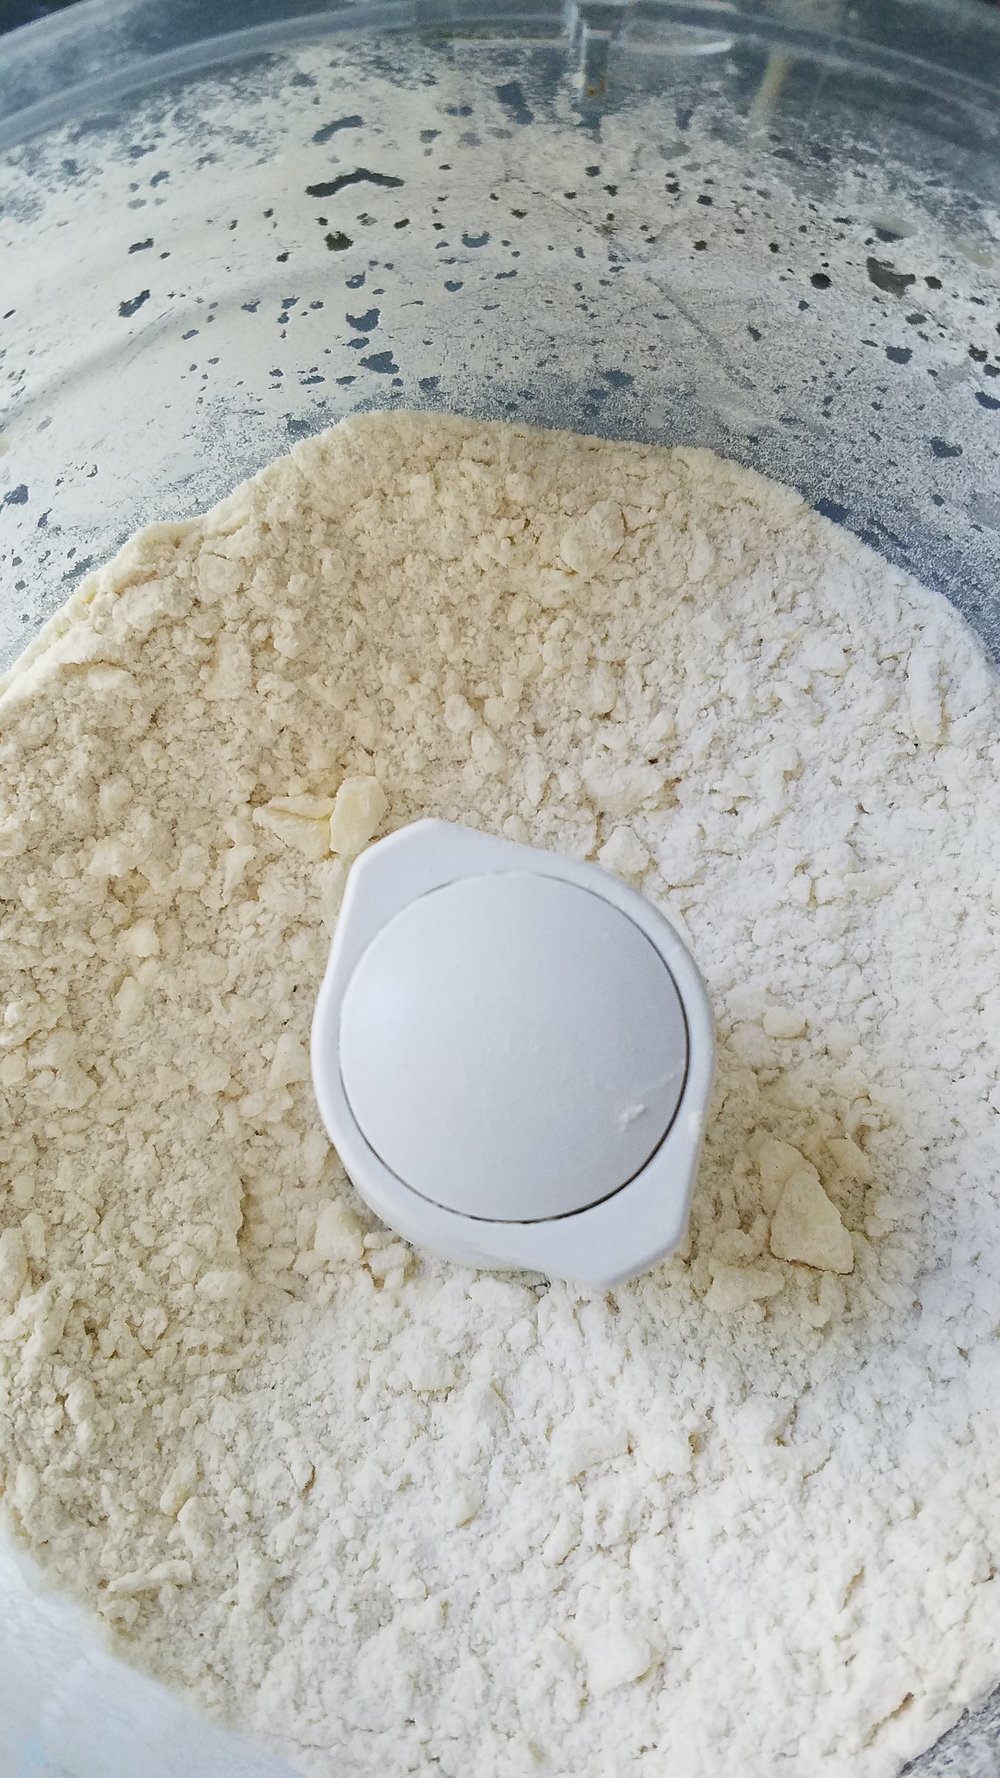 At this point your pastry dough should look like coarse meal